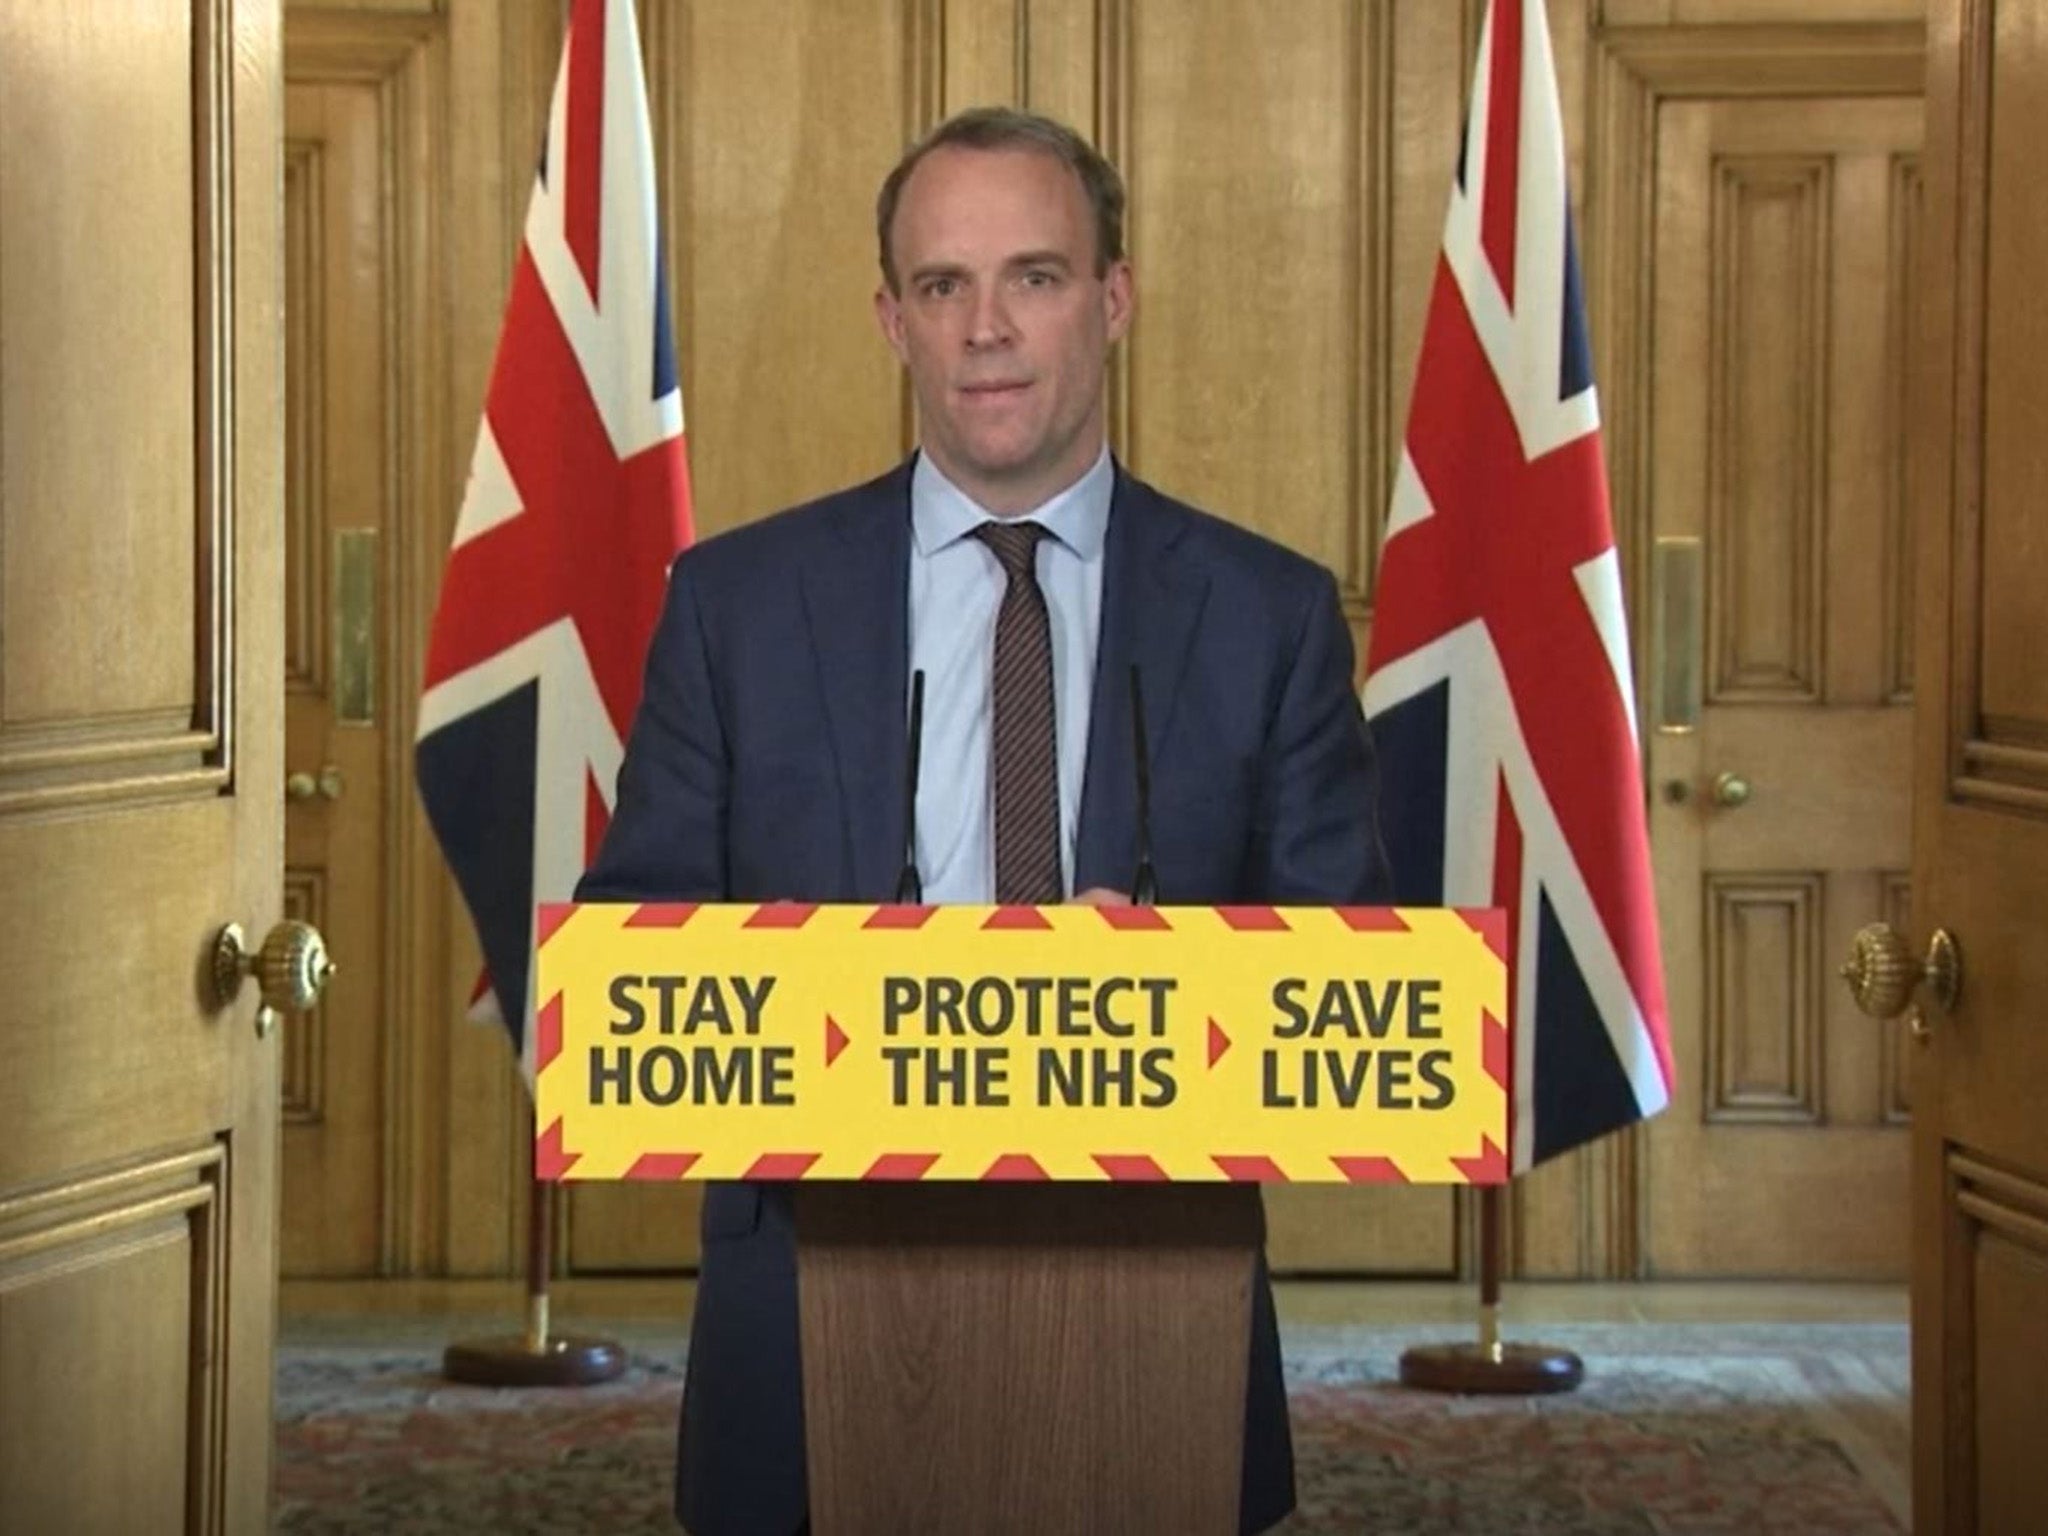 Dominic Raab filling in for his then boss Boris Johnson at a Covid briefing in 2020